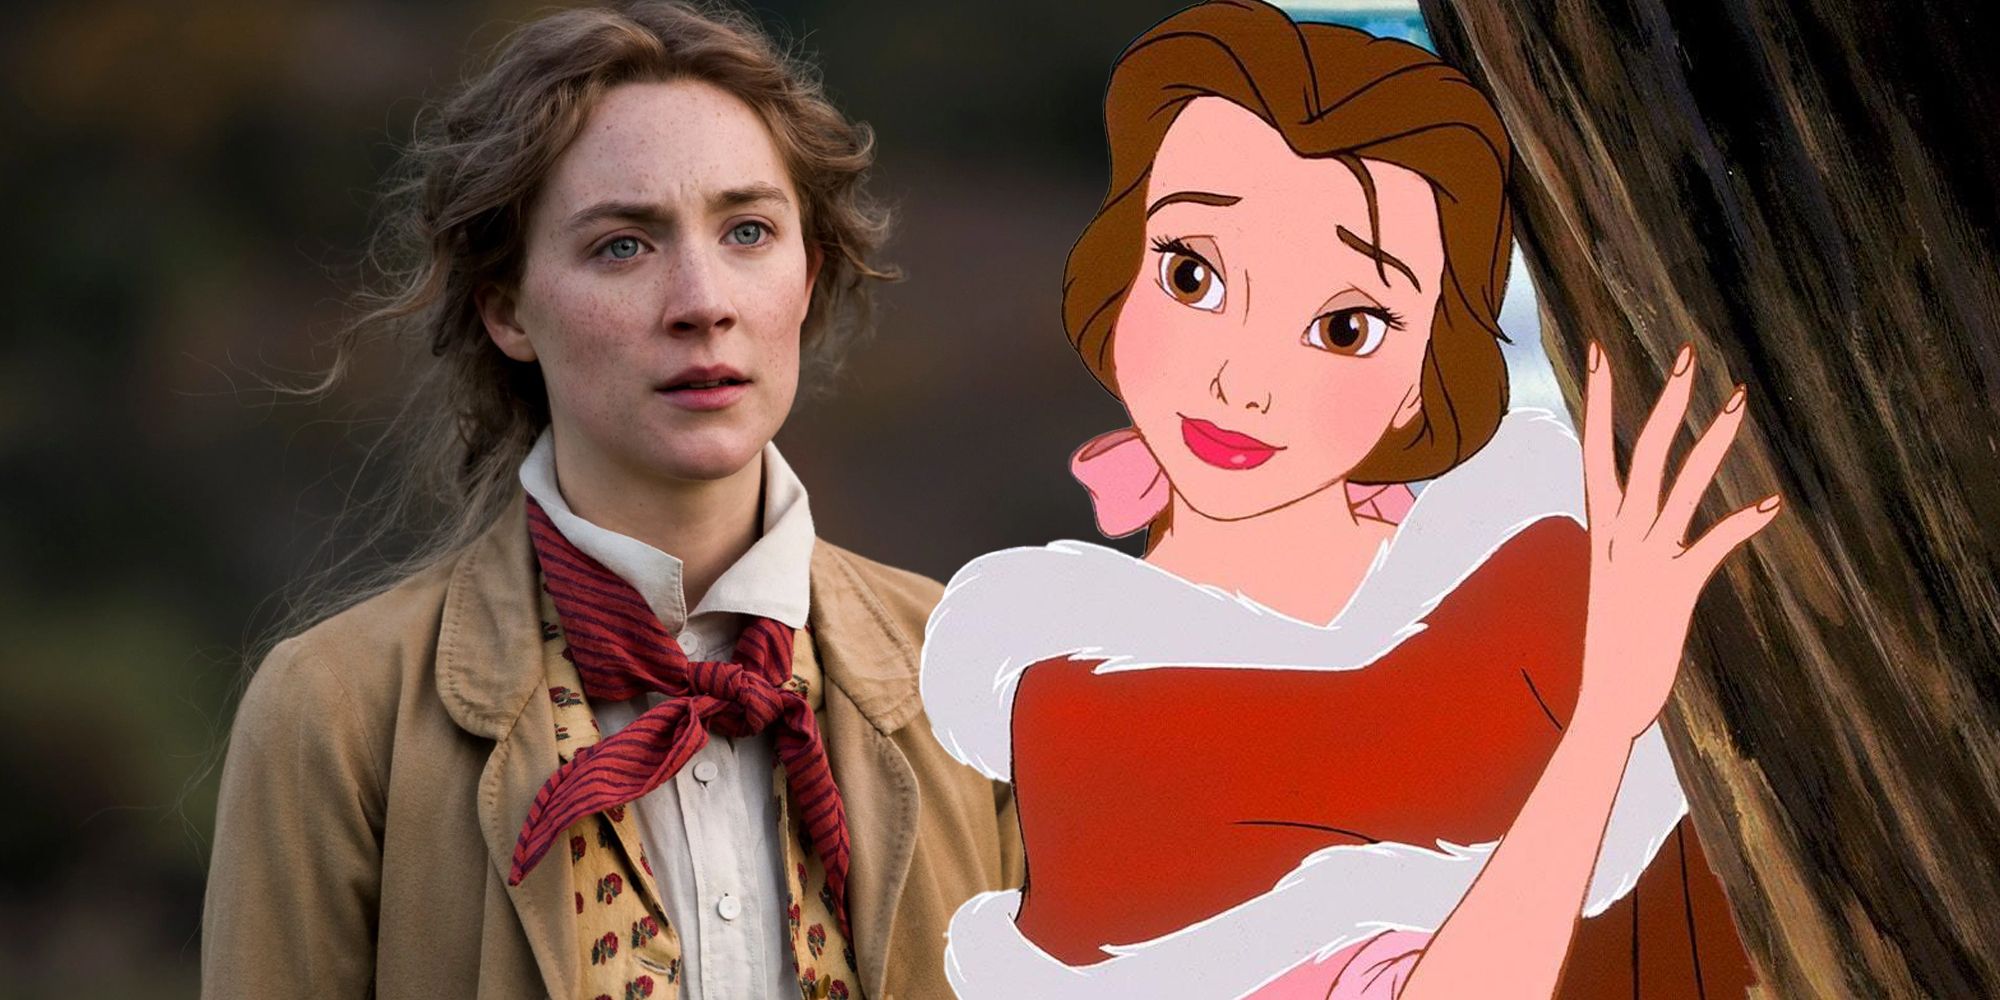 Belle from Beauty and the Beast with Jo March from Little Women